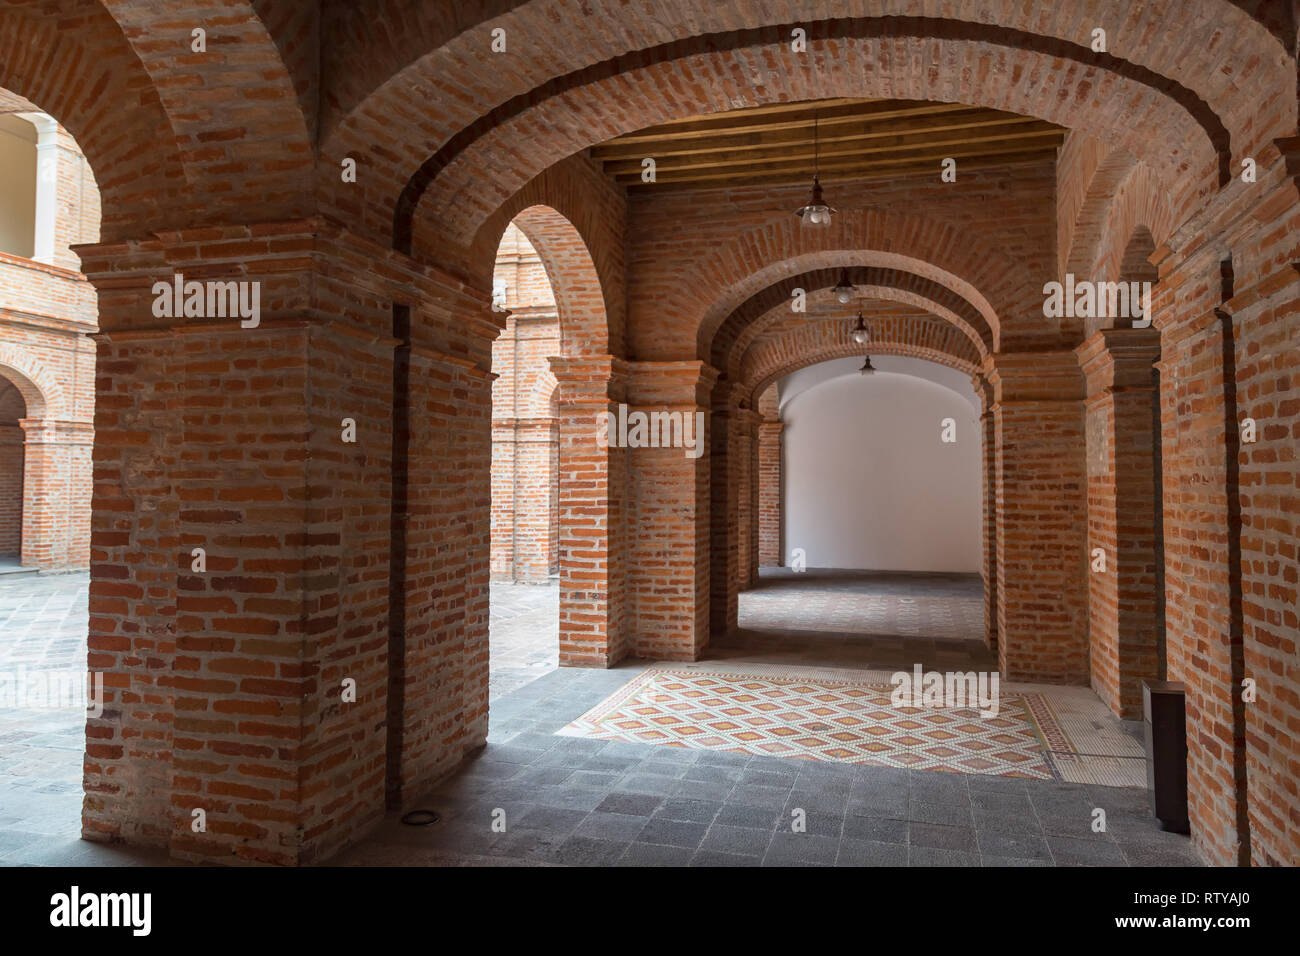 Quito, Ecuador, January 2019: Interiors of the Contemporary Art Center, exposed brick walls and arches, where works of contemporary artists are exhibi Stock Photo